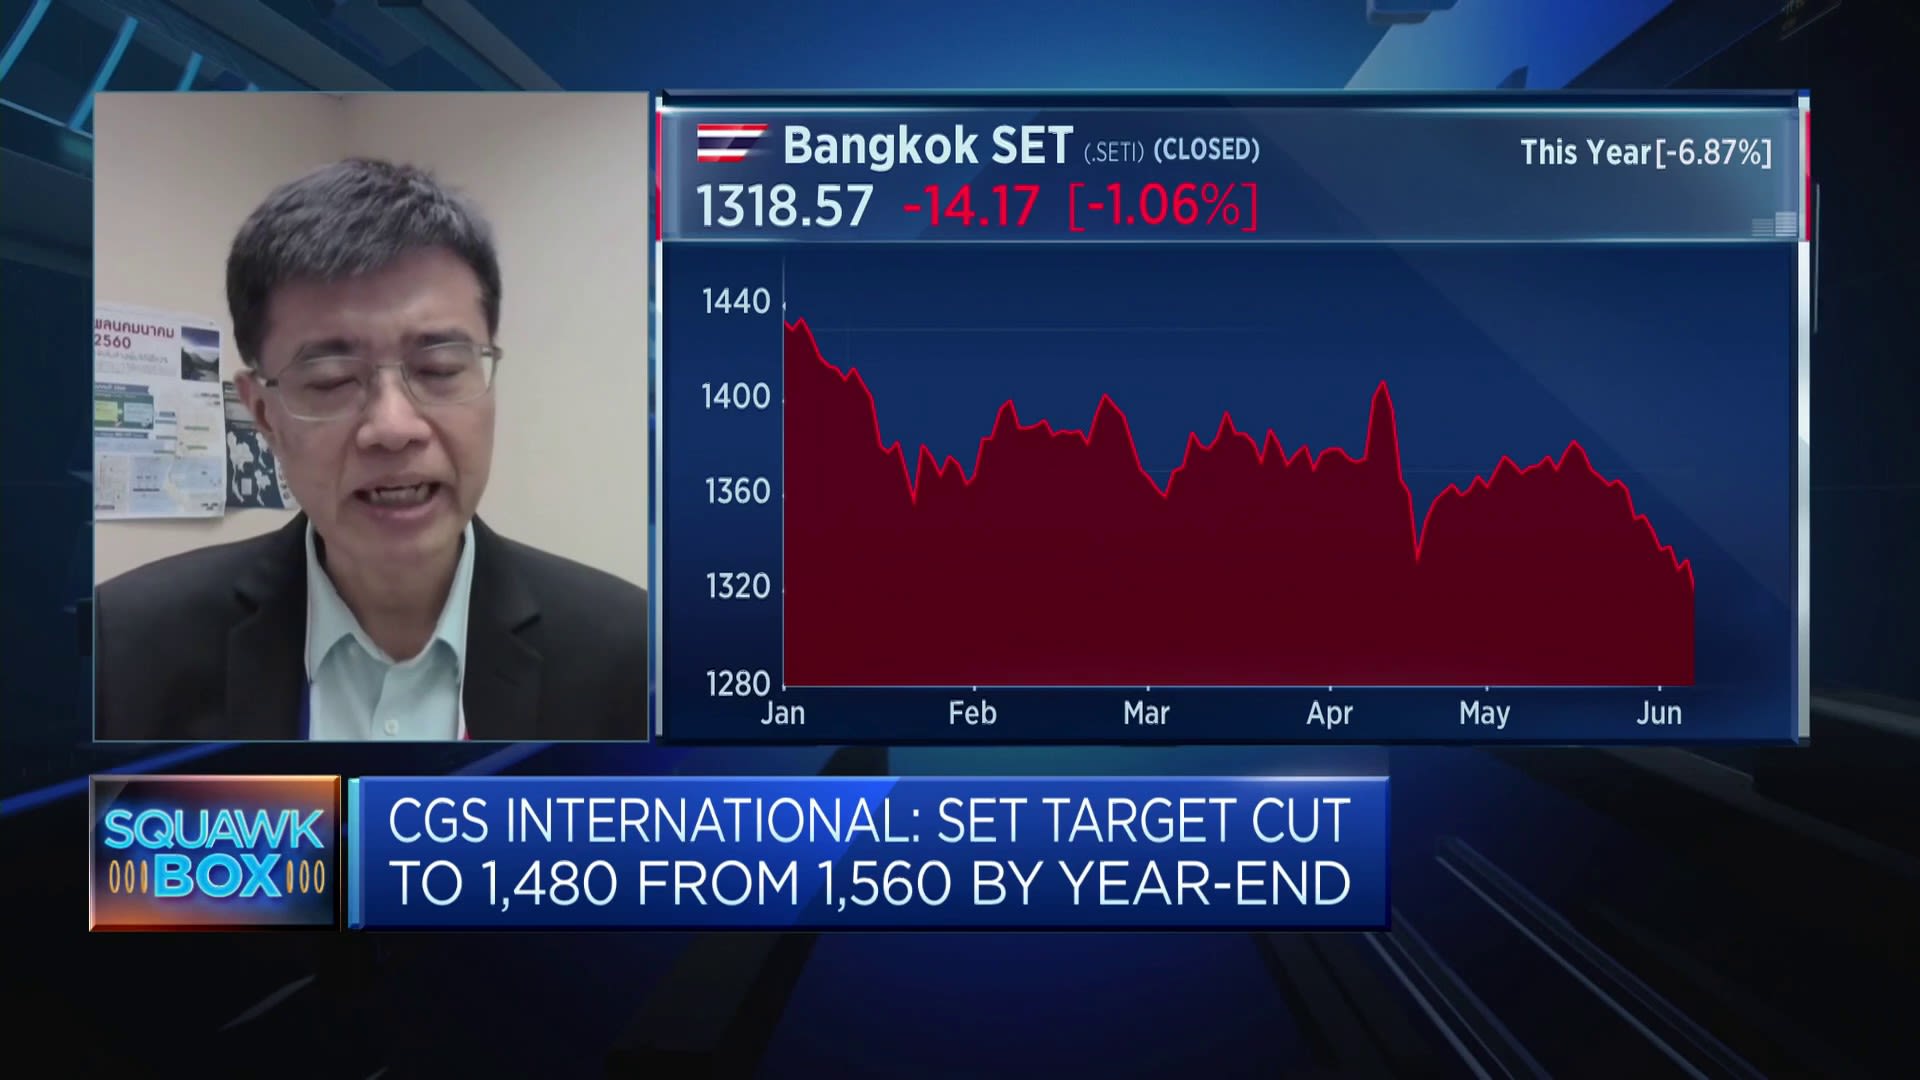 Thailand’s political uncertainty affecting investor sentiment: Analyst [Video]